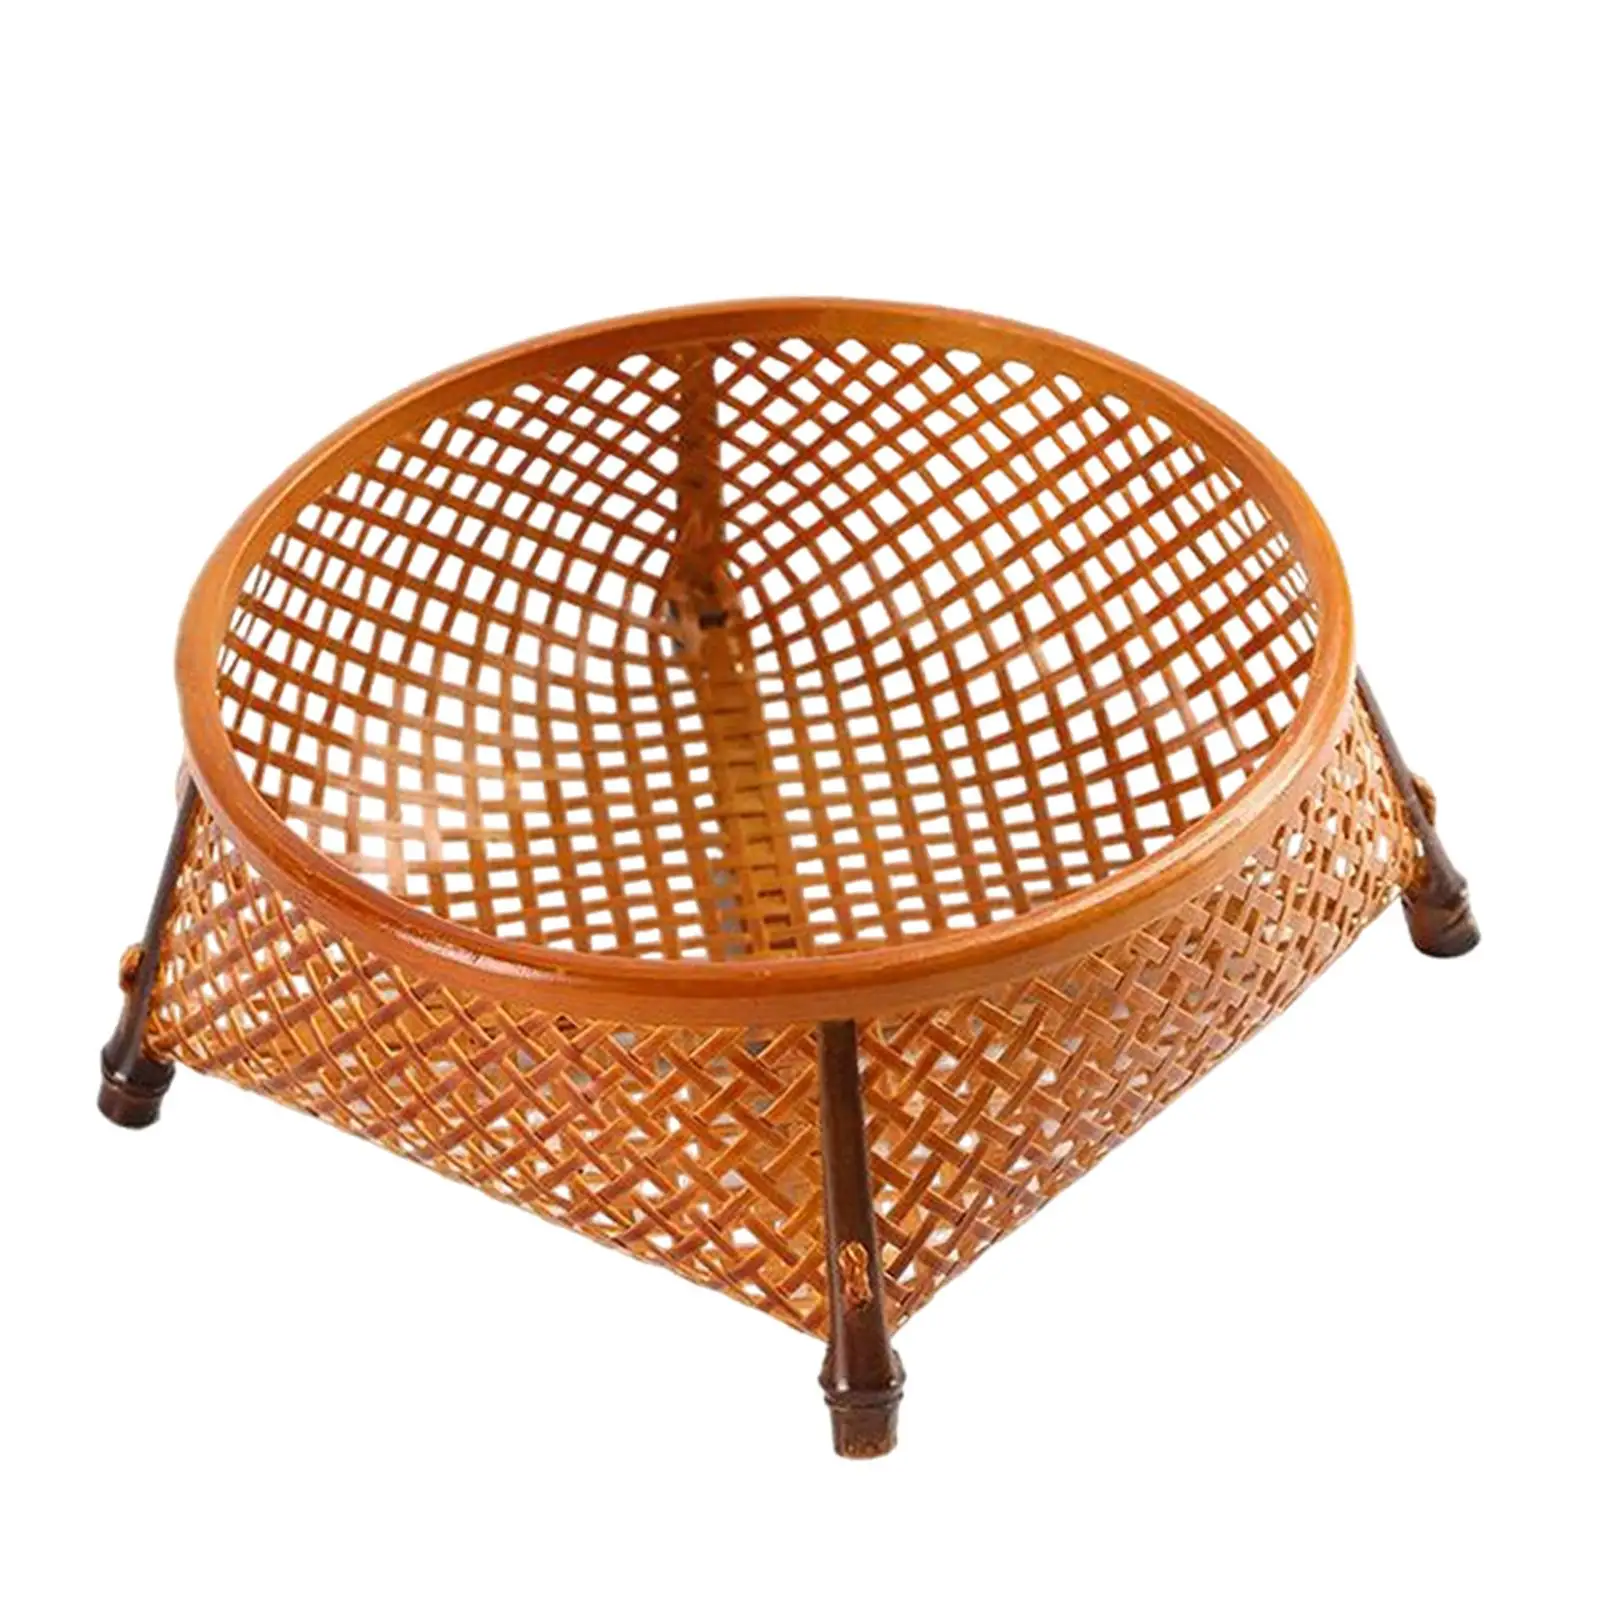 Rattan Basket Wicker Basket Storage Basket Decorative Serving Tray Woven Bowl for Food Bread, Vegetables Fruits Coffee Table